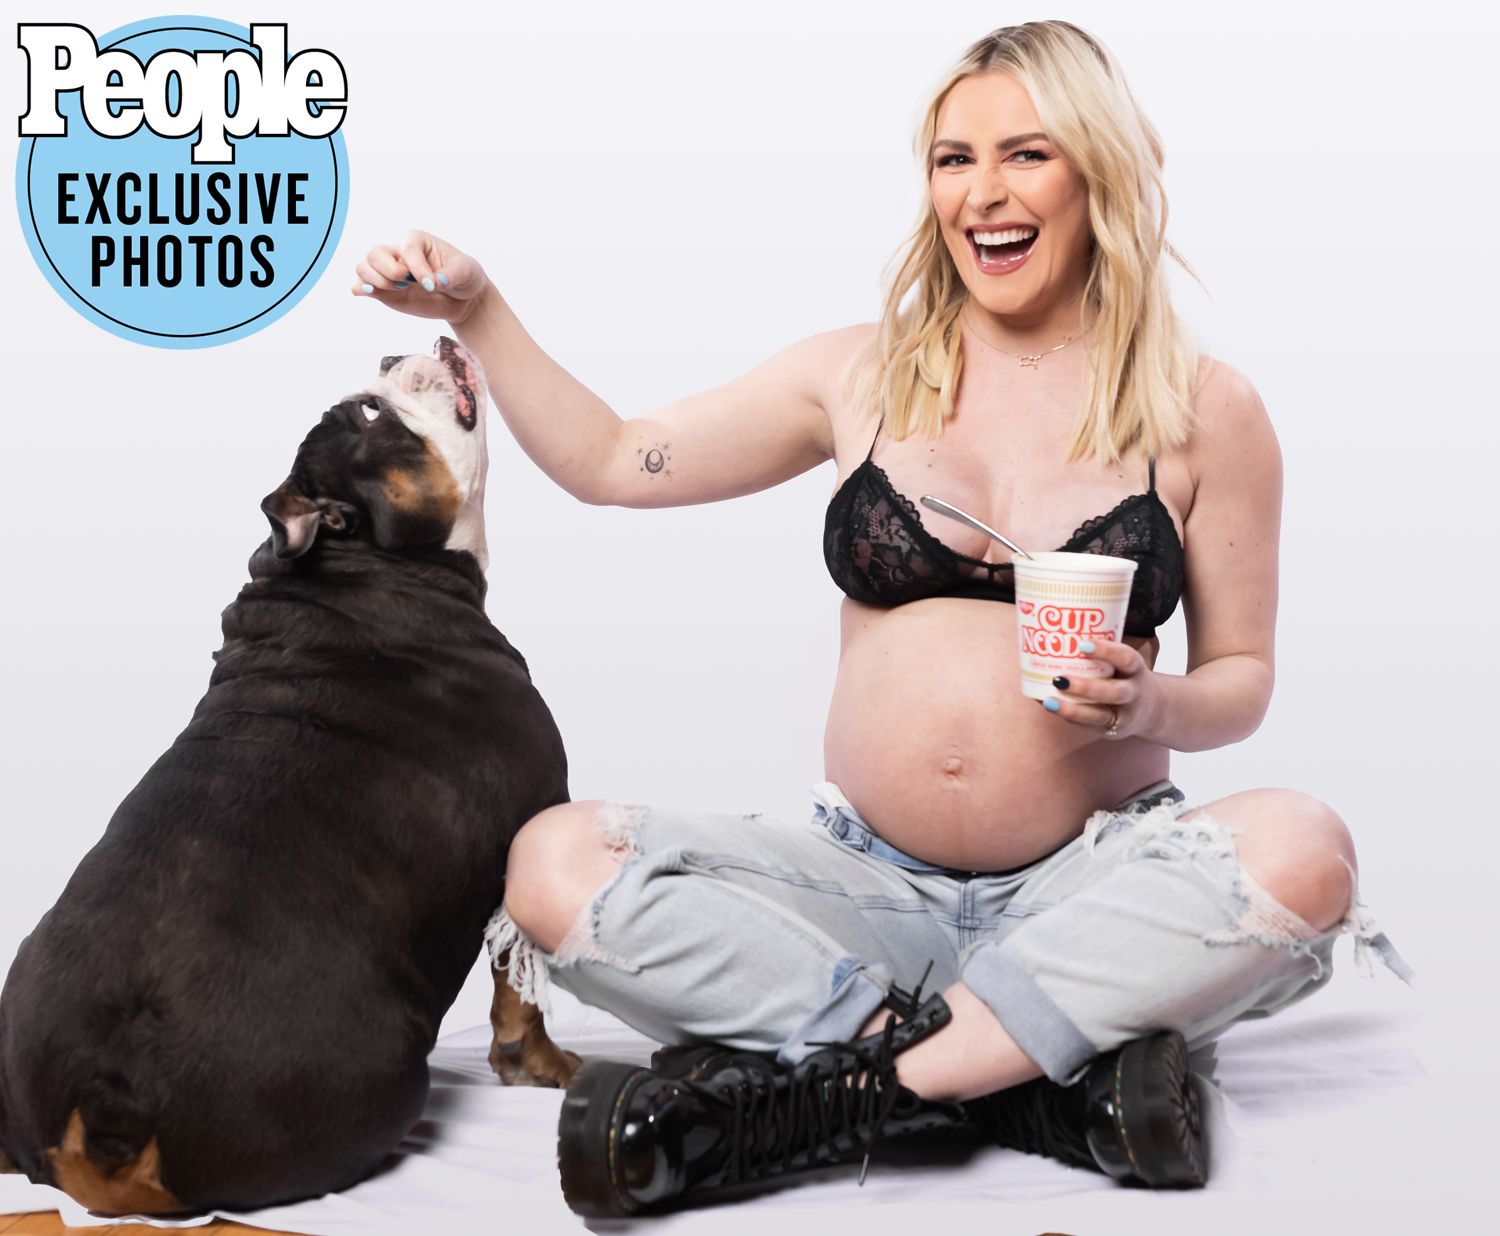 Ex WWE Star Renee Young Share Naked Pregnancy Photos 7